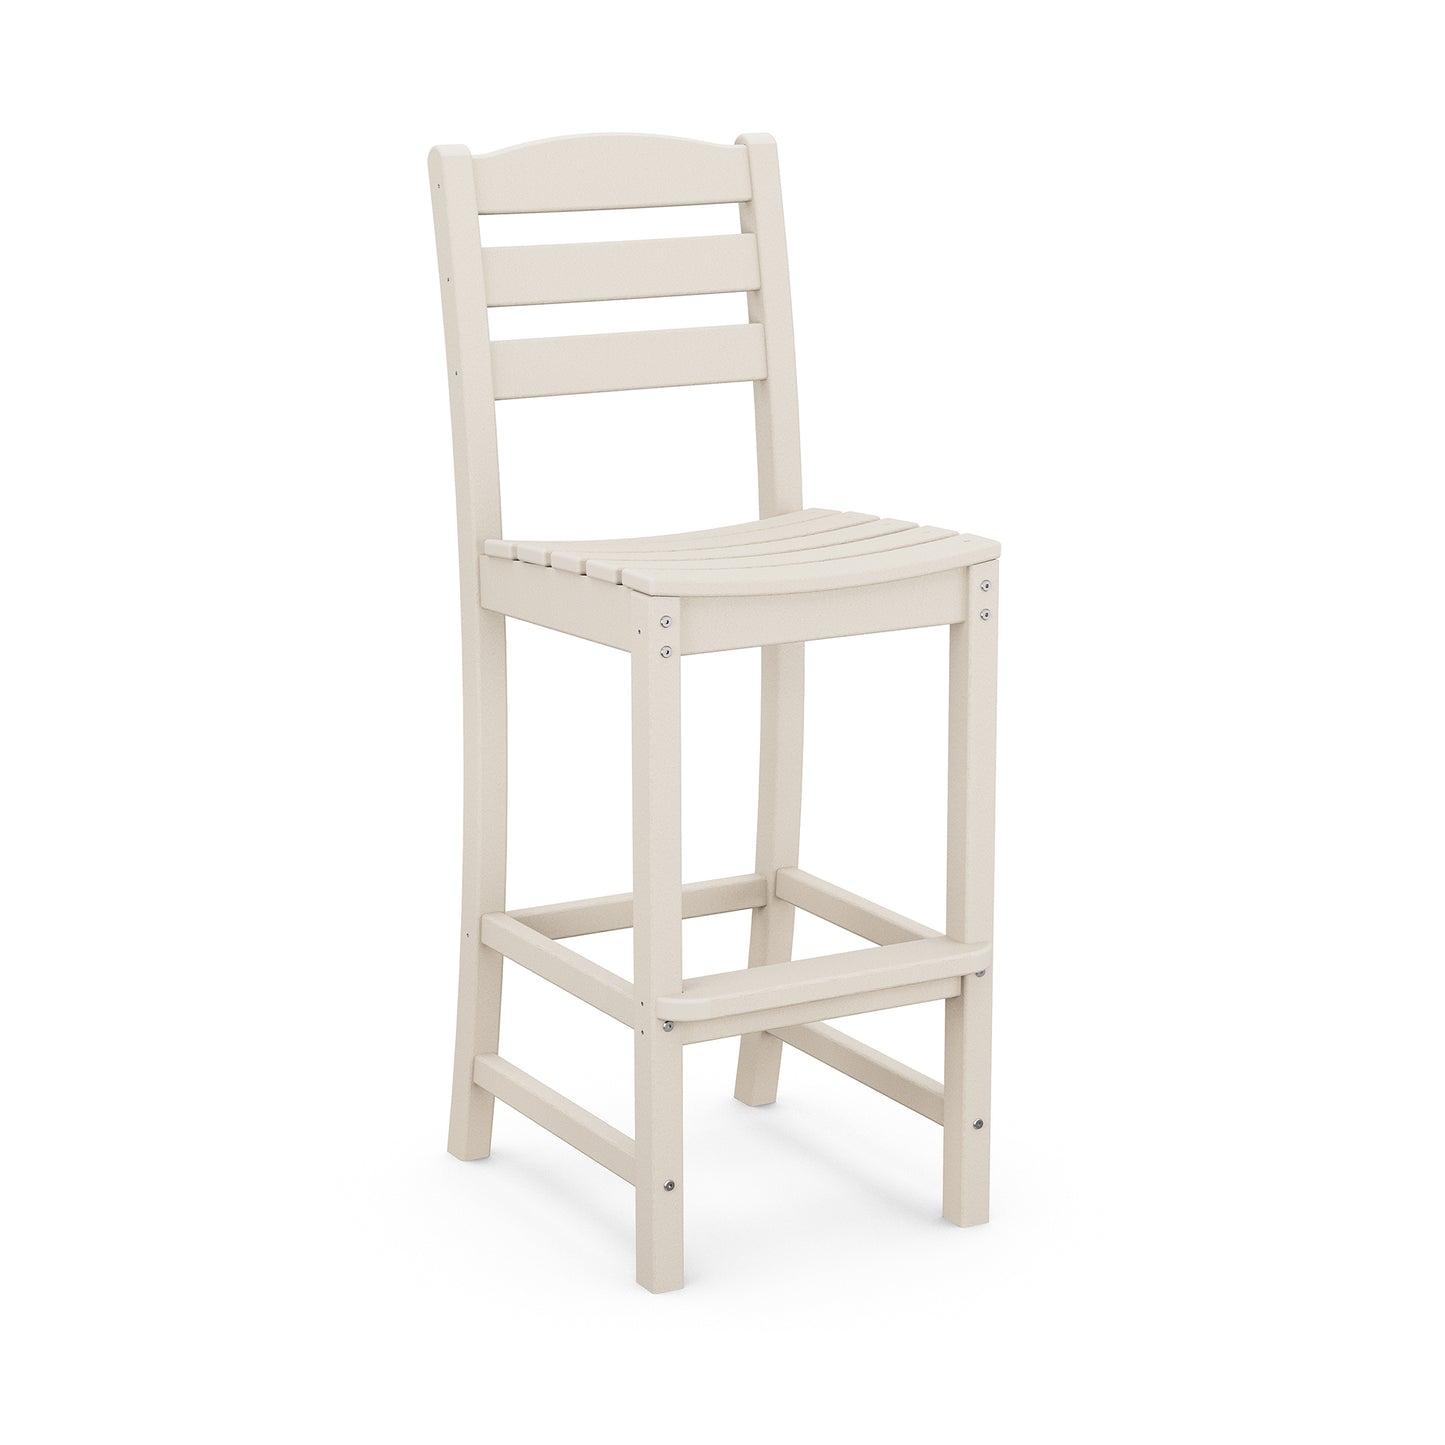 A simple beige-colored POLYWOOD® La Casa Cafe Outdoor Bar Side Chair with a slatted back and seat, made of sturdy plastic, isolated on a white background.